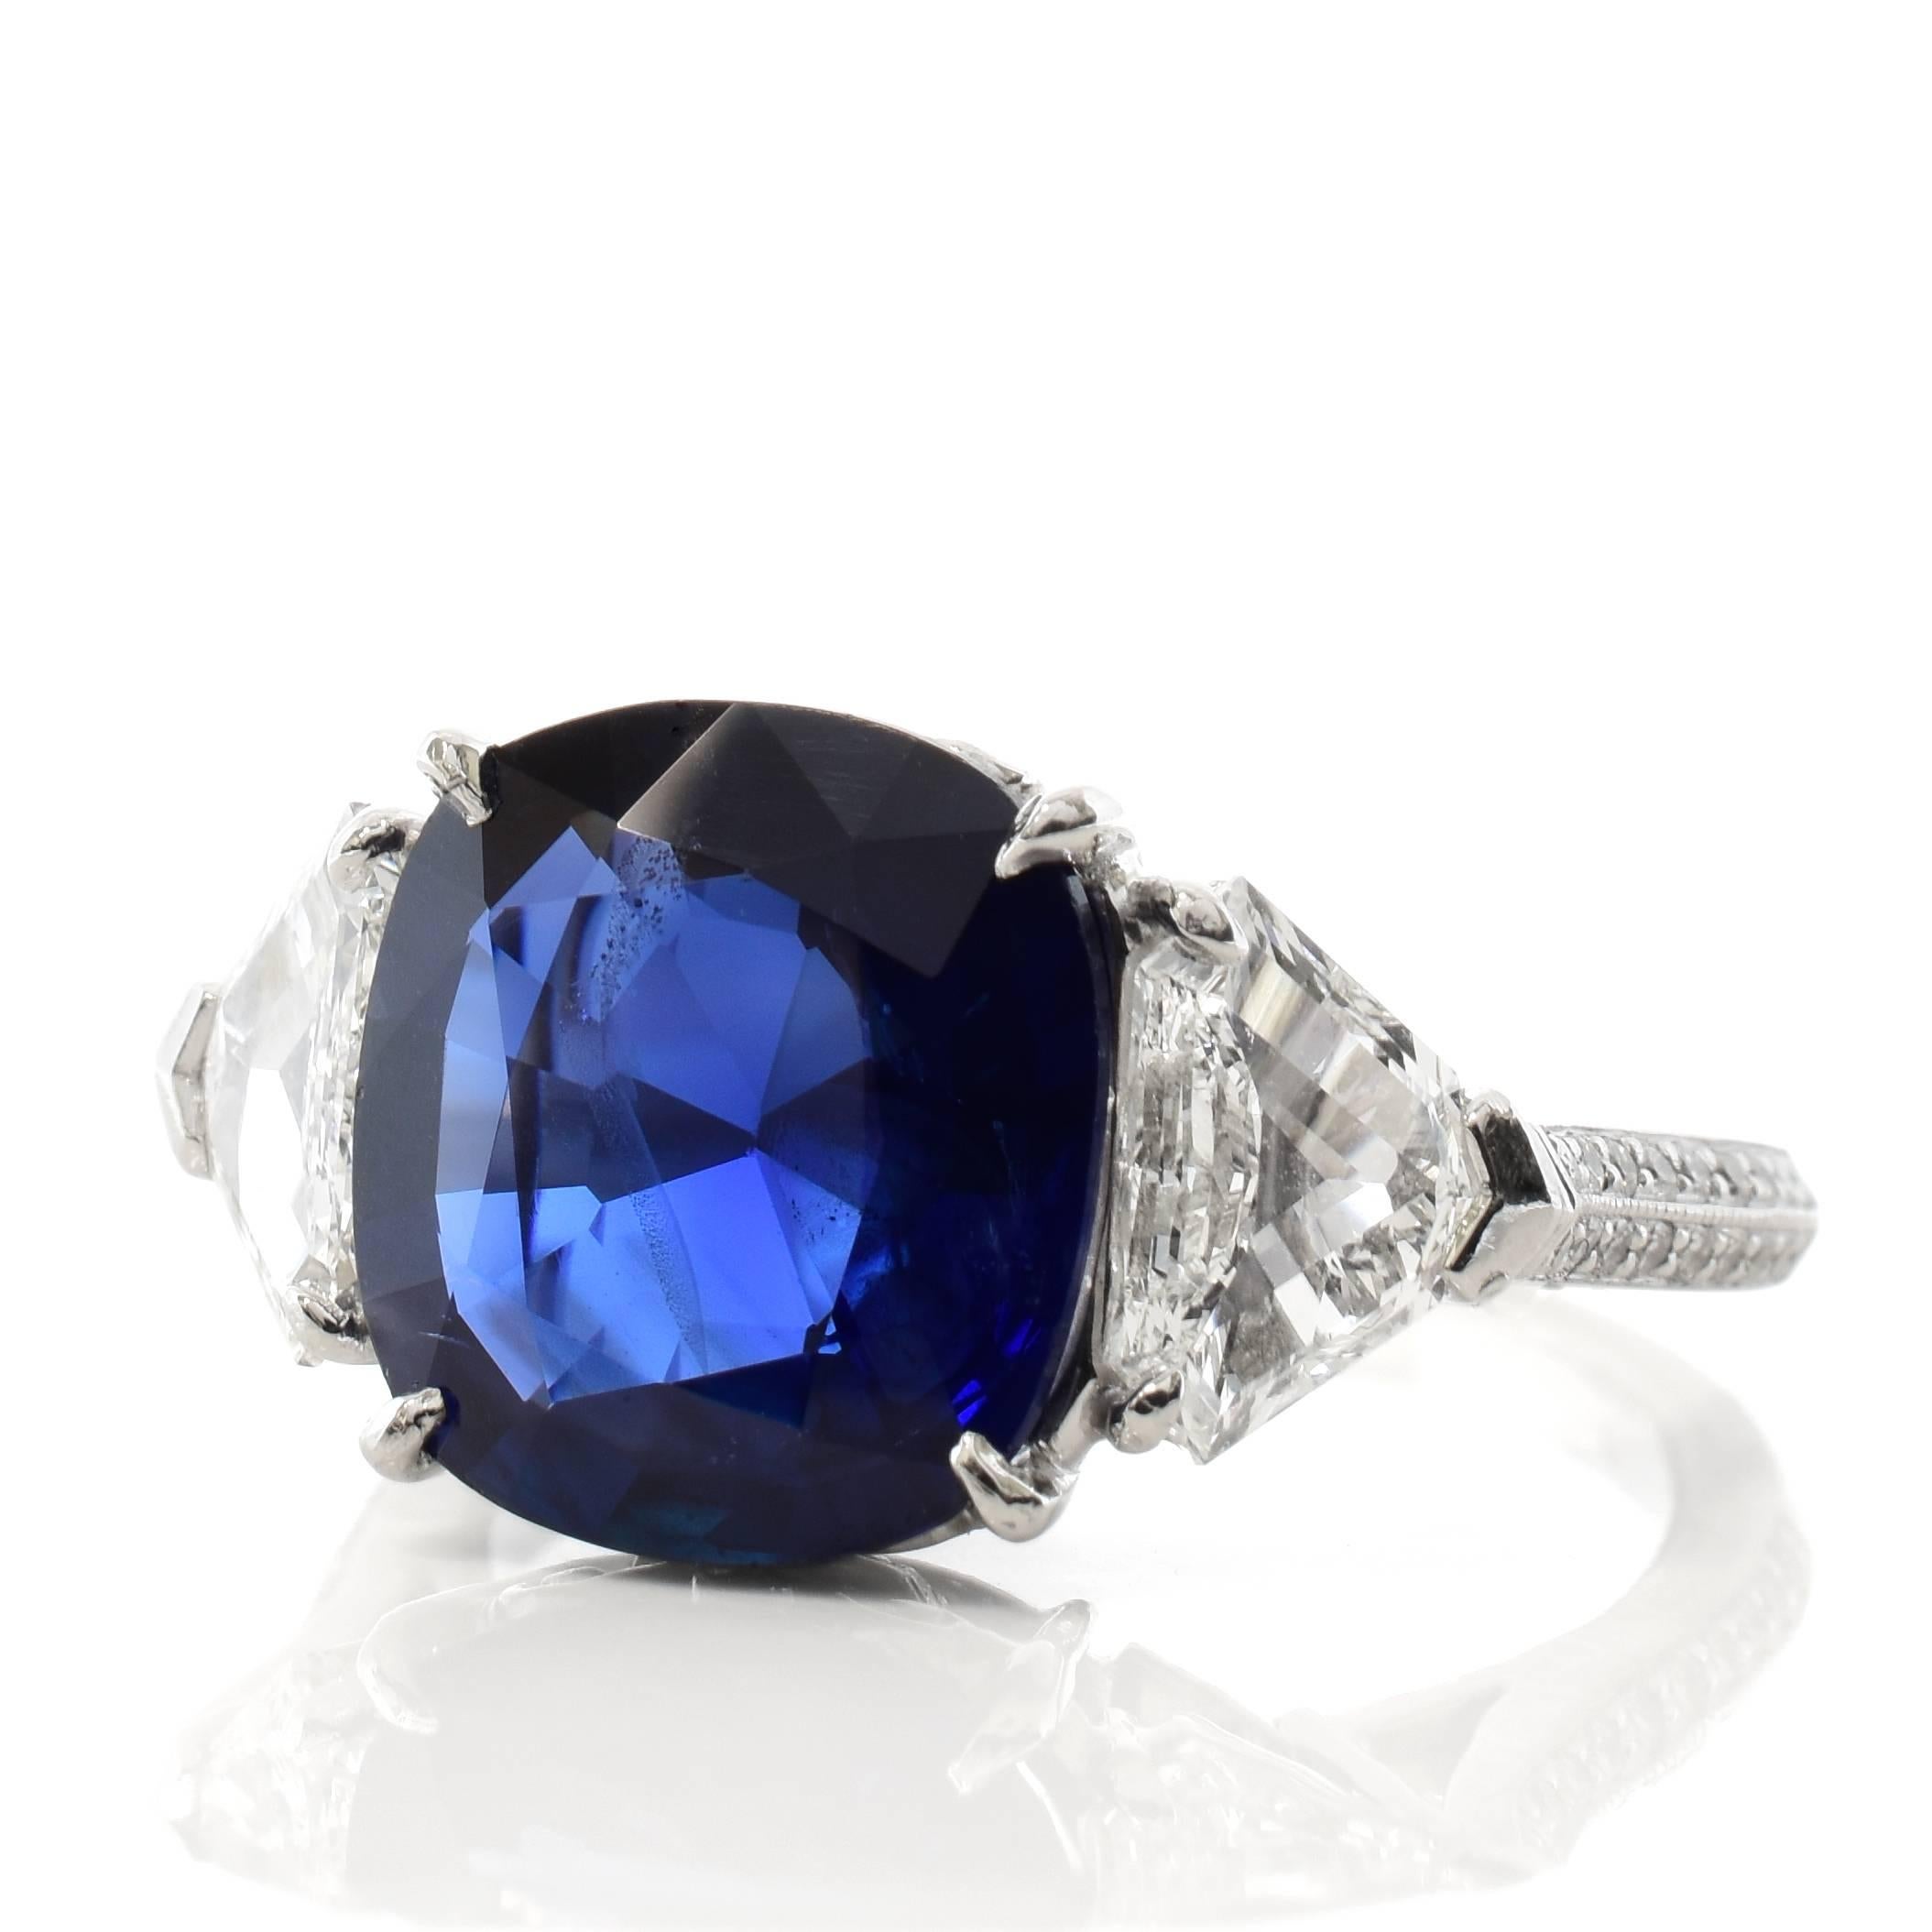 A platinum ring featuring a 4.74 carat Burma no heat sapphire center stone. The stone is certified by AGL Laboratories and GemResearch Swisslab and the original certificates are included. 

The sapphire is accented by two shield step cut diamonds